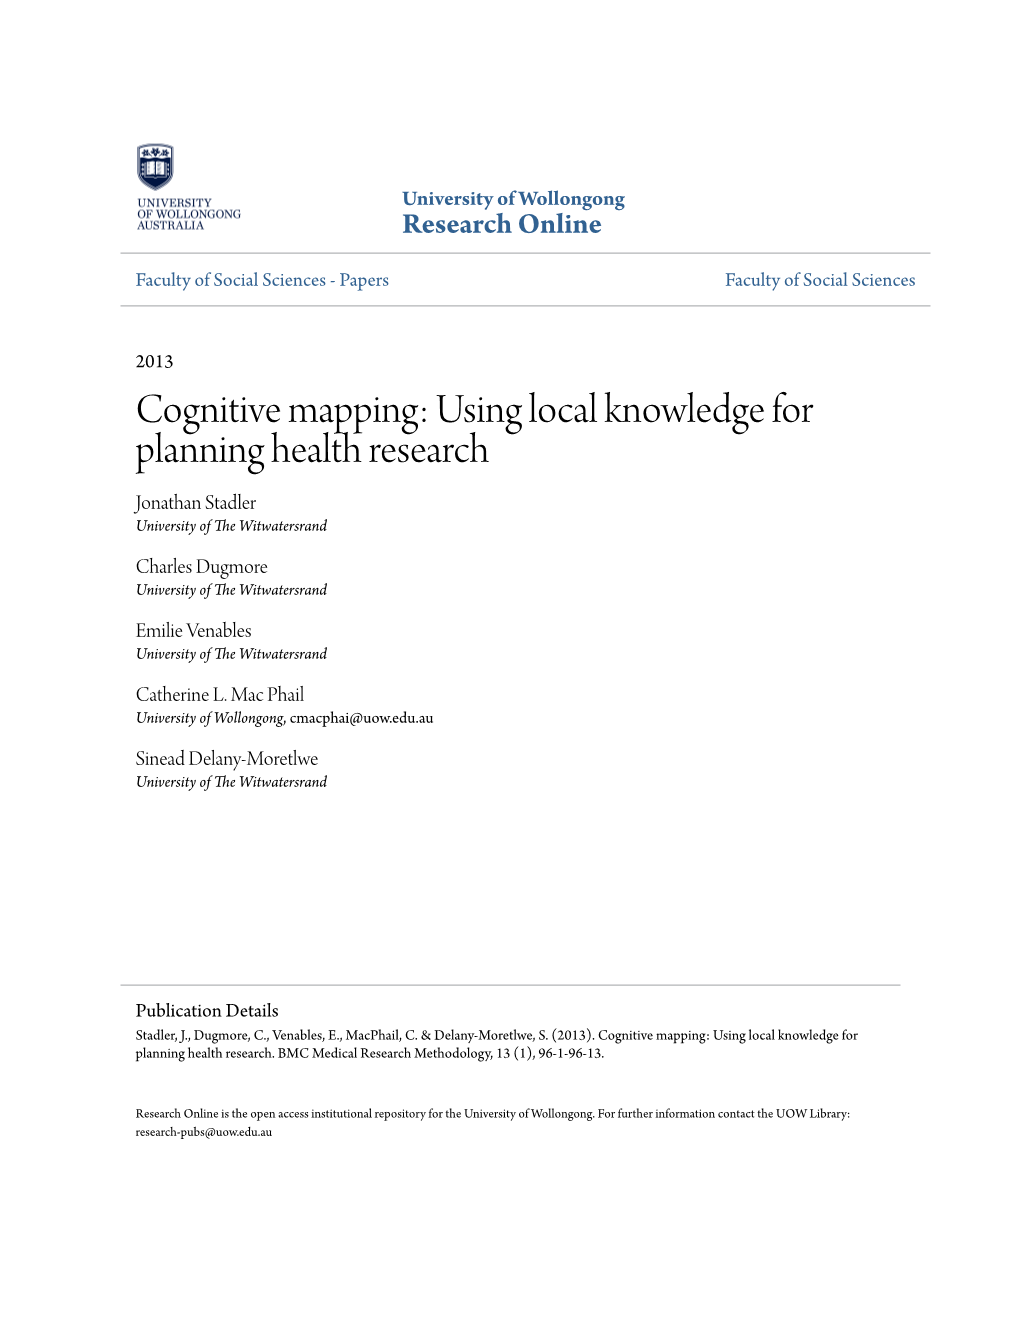 Cognitive Mapping: Using Local Knowledge for Planning Health Research Jonathan Stadler University of the Witwatersrand